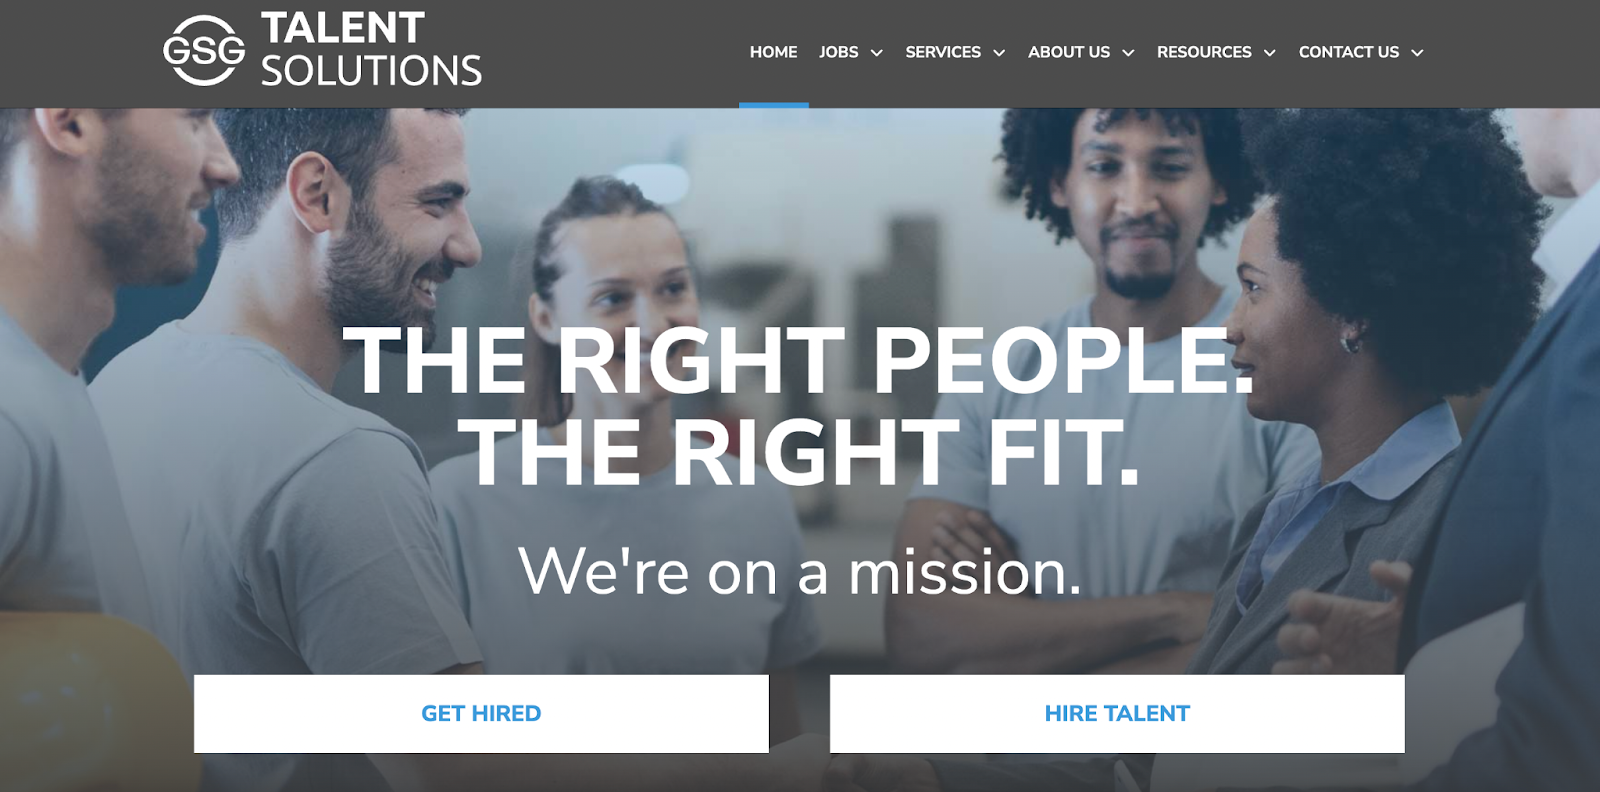 The homepage website design for GSG Talent Solutions, a recruitment firm.